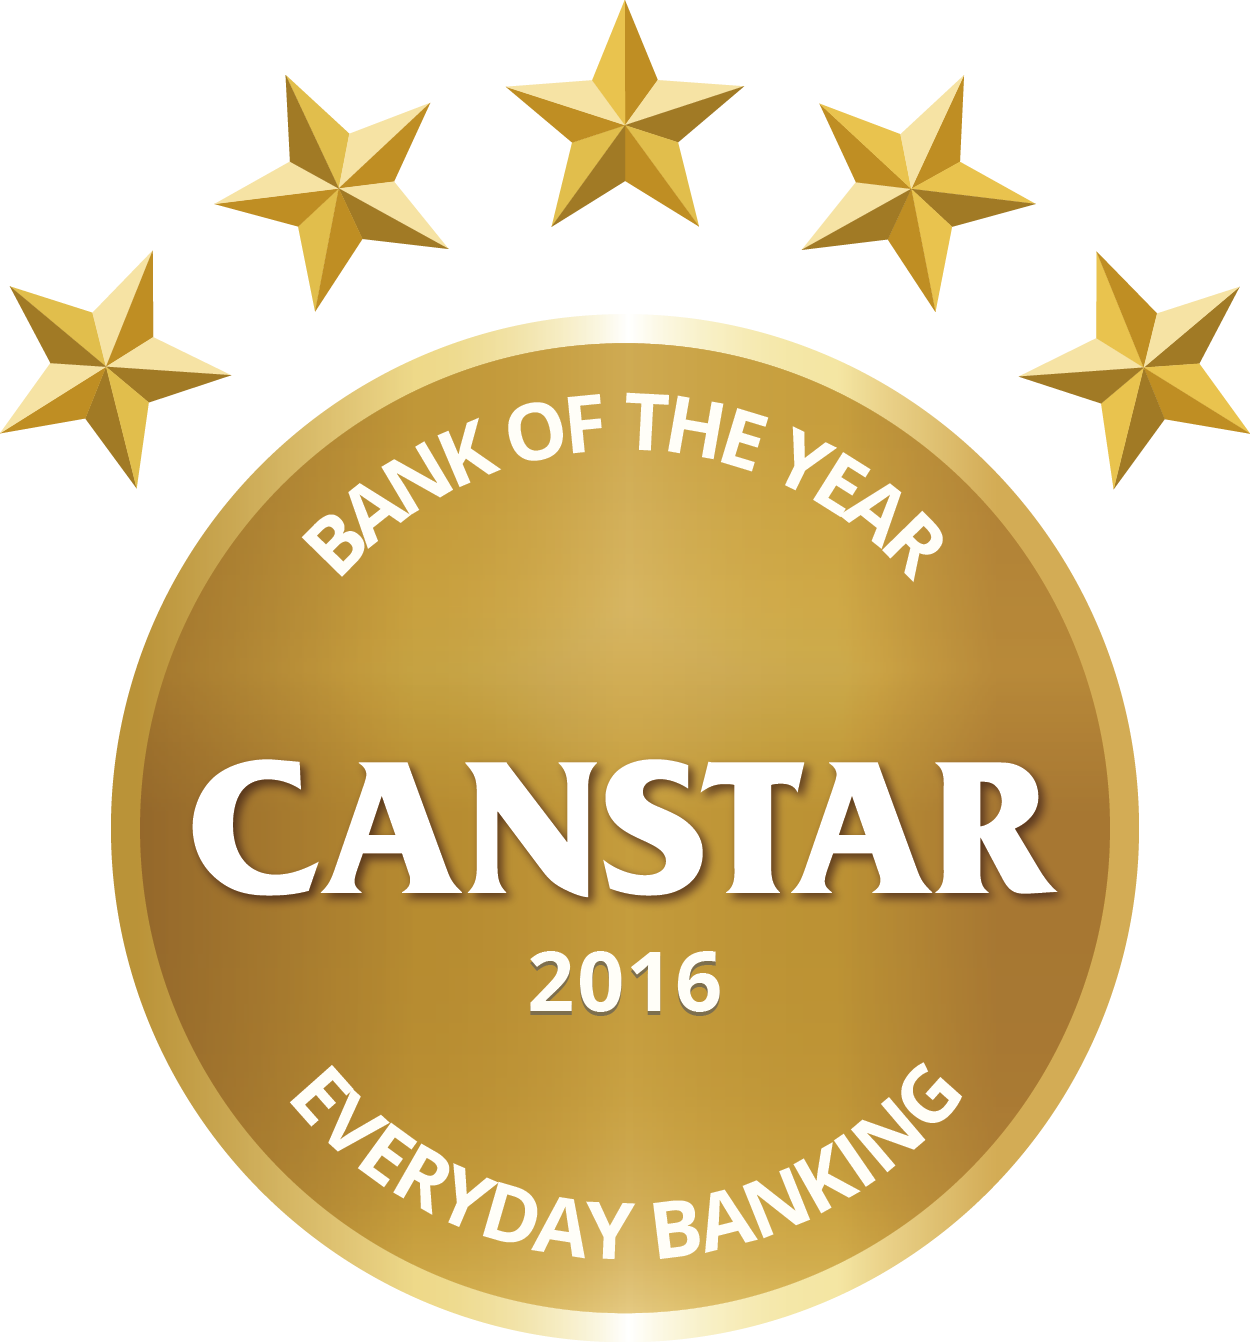 Canstar 2016 – Bank of the Year  – Everyday Banking